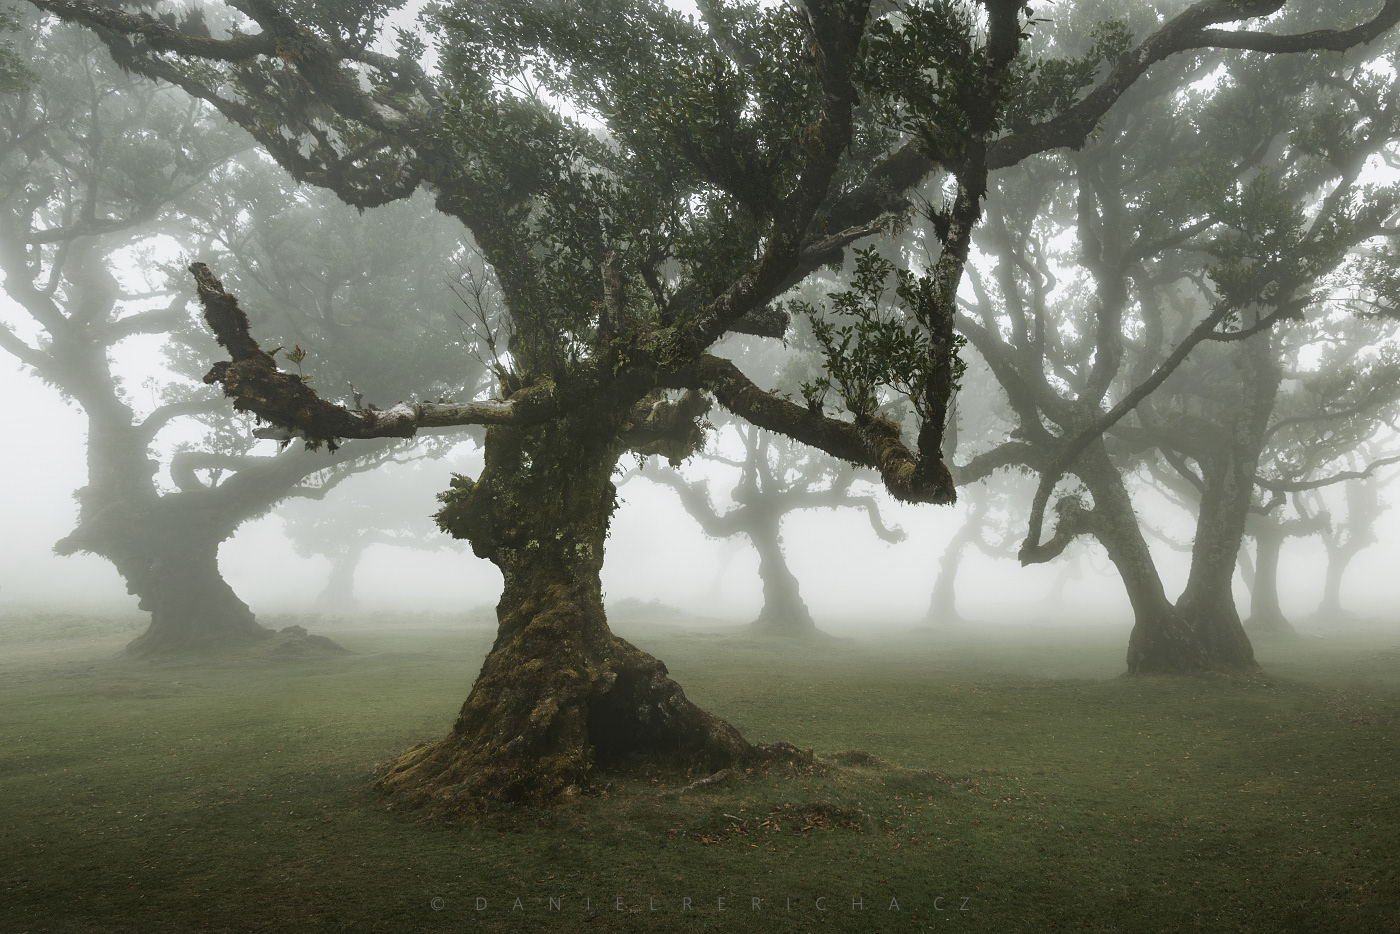 The magical misty forest of Fanal on the island of Madeira - laurel forest